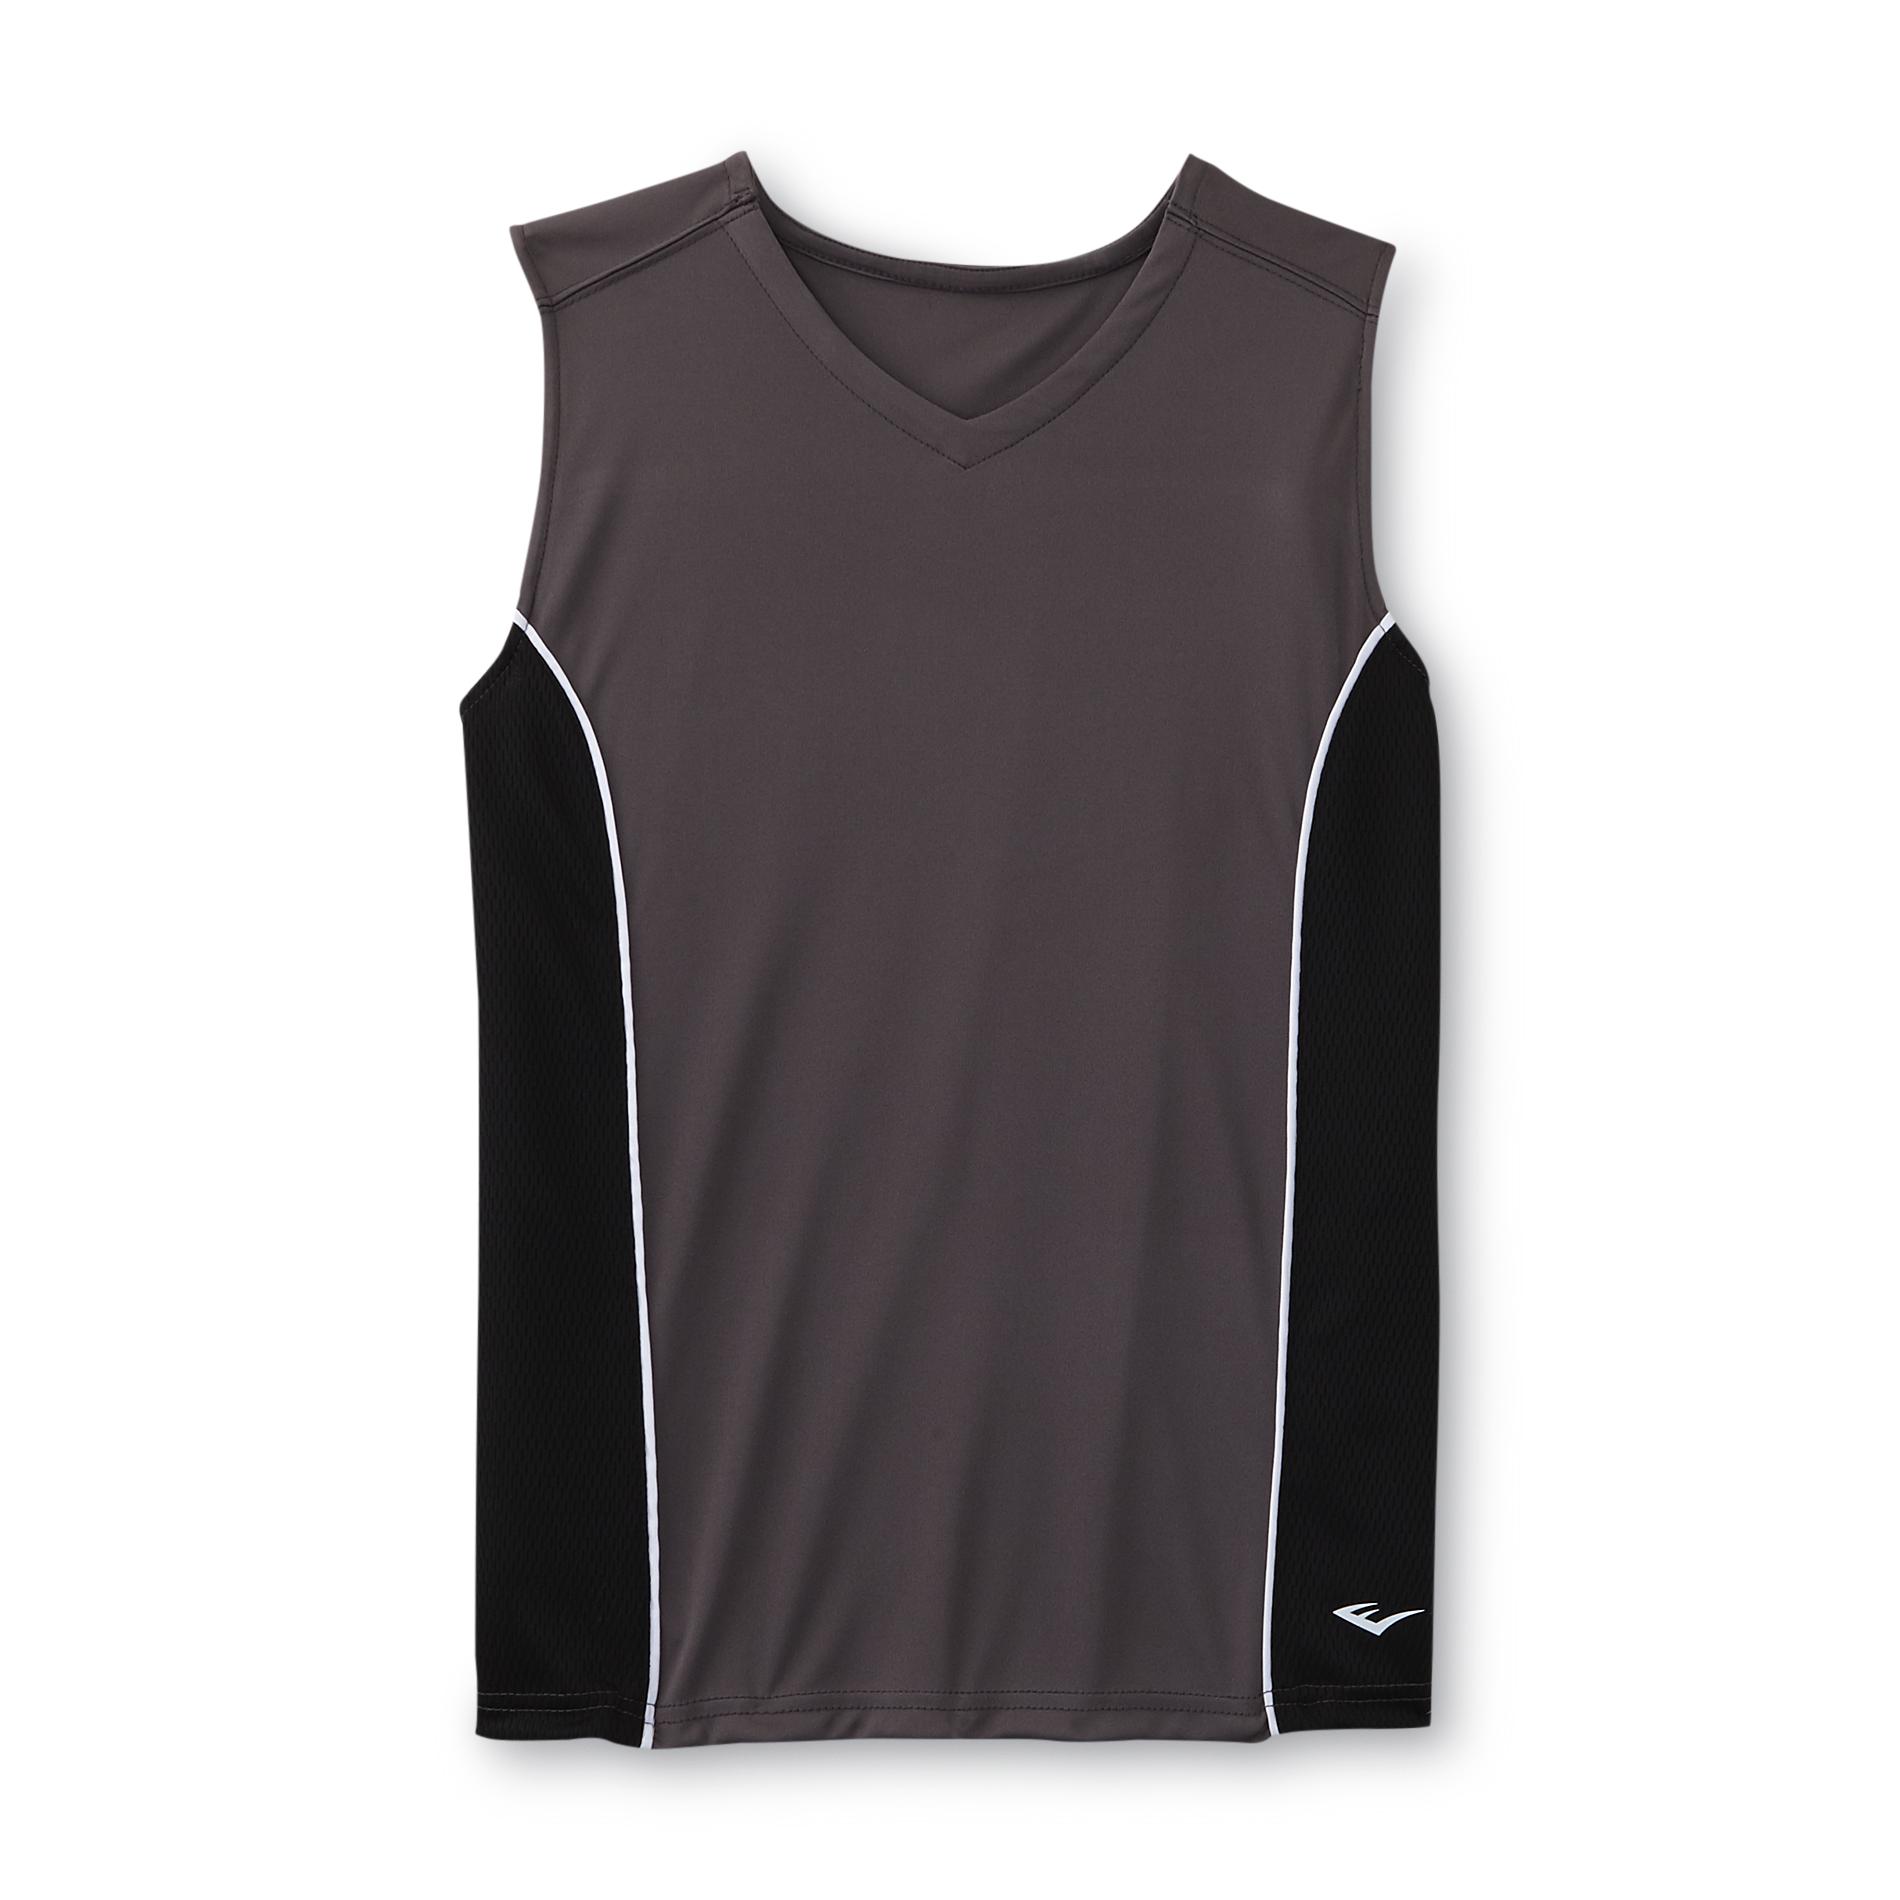 Boy's Mesh Athletic Muscle Shirt